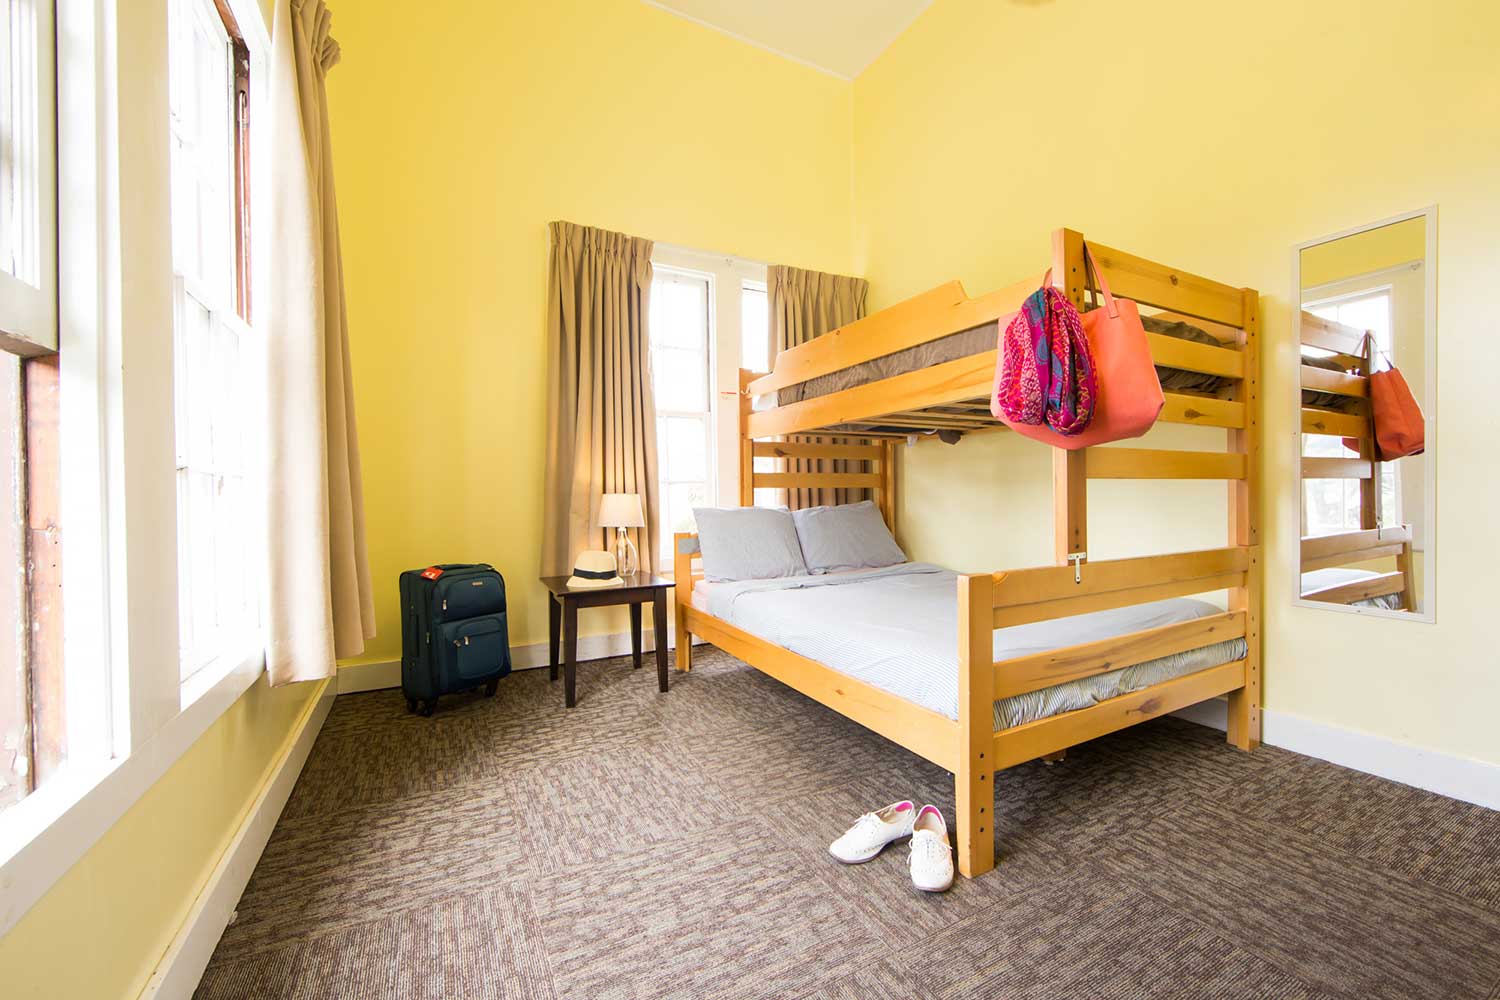 a private room at HI San Francisco Fisherman's Wharf hostel with one full-sized bed and one twin-sized bed bunked over it. The walls are a soft yellow color. There is a suitcase in the corner, and a pair of shoes and a bright pink scarf and handbag near the foot of the bed.